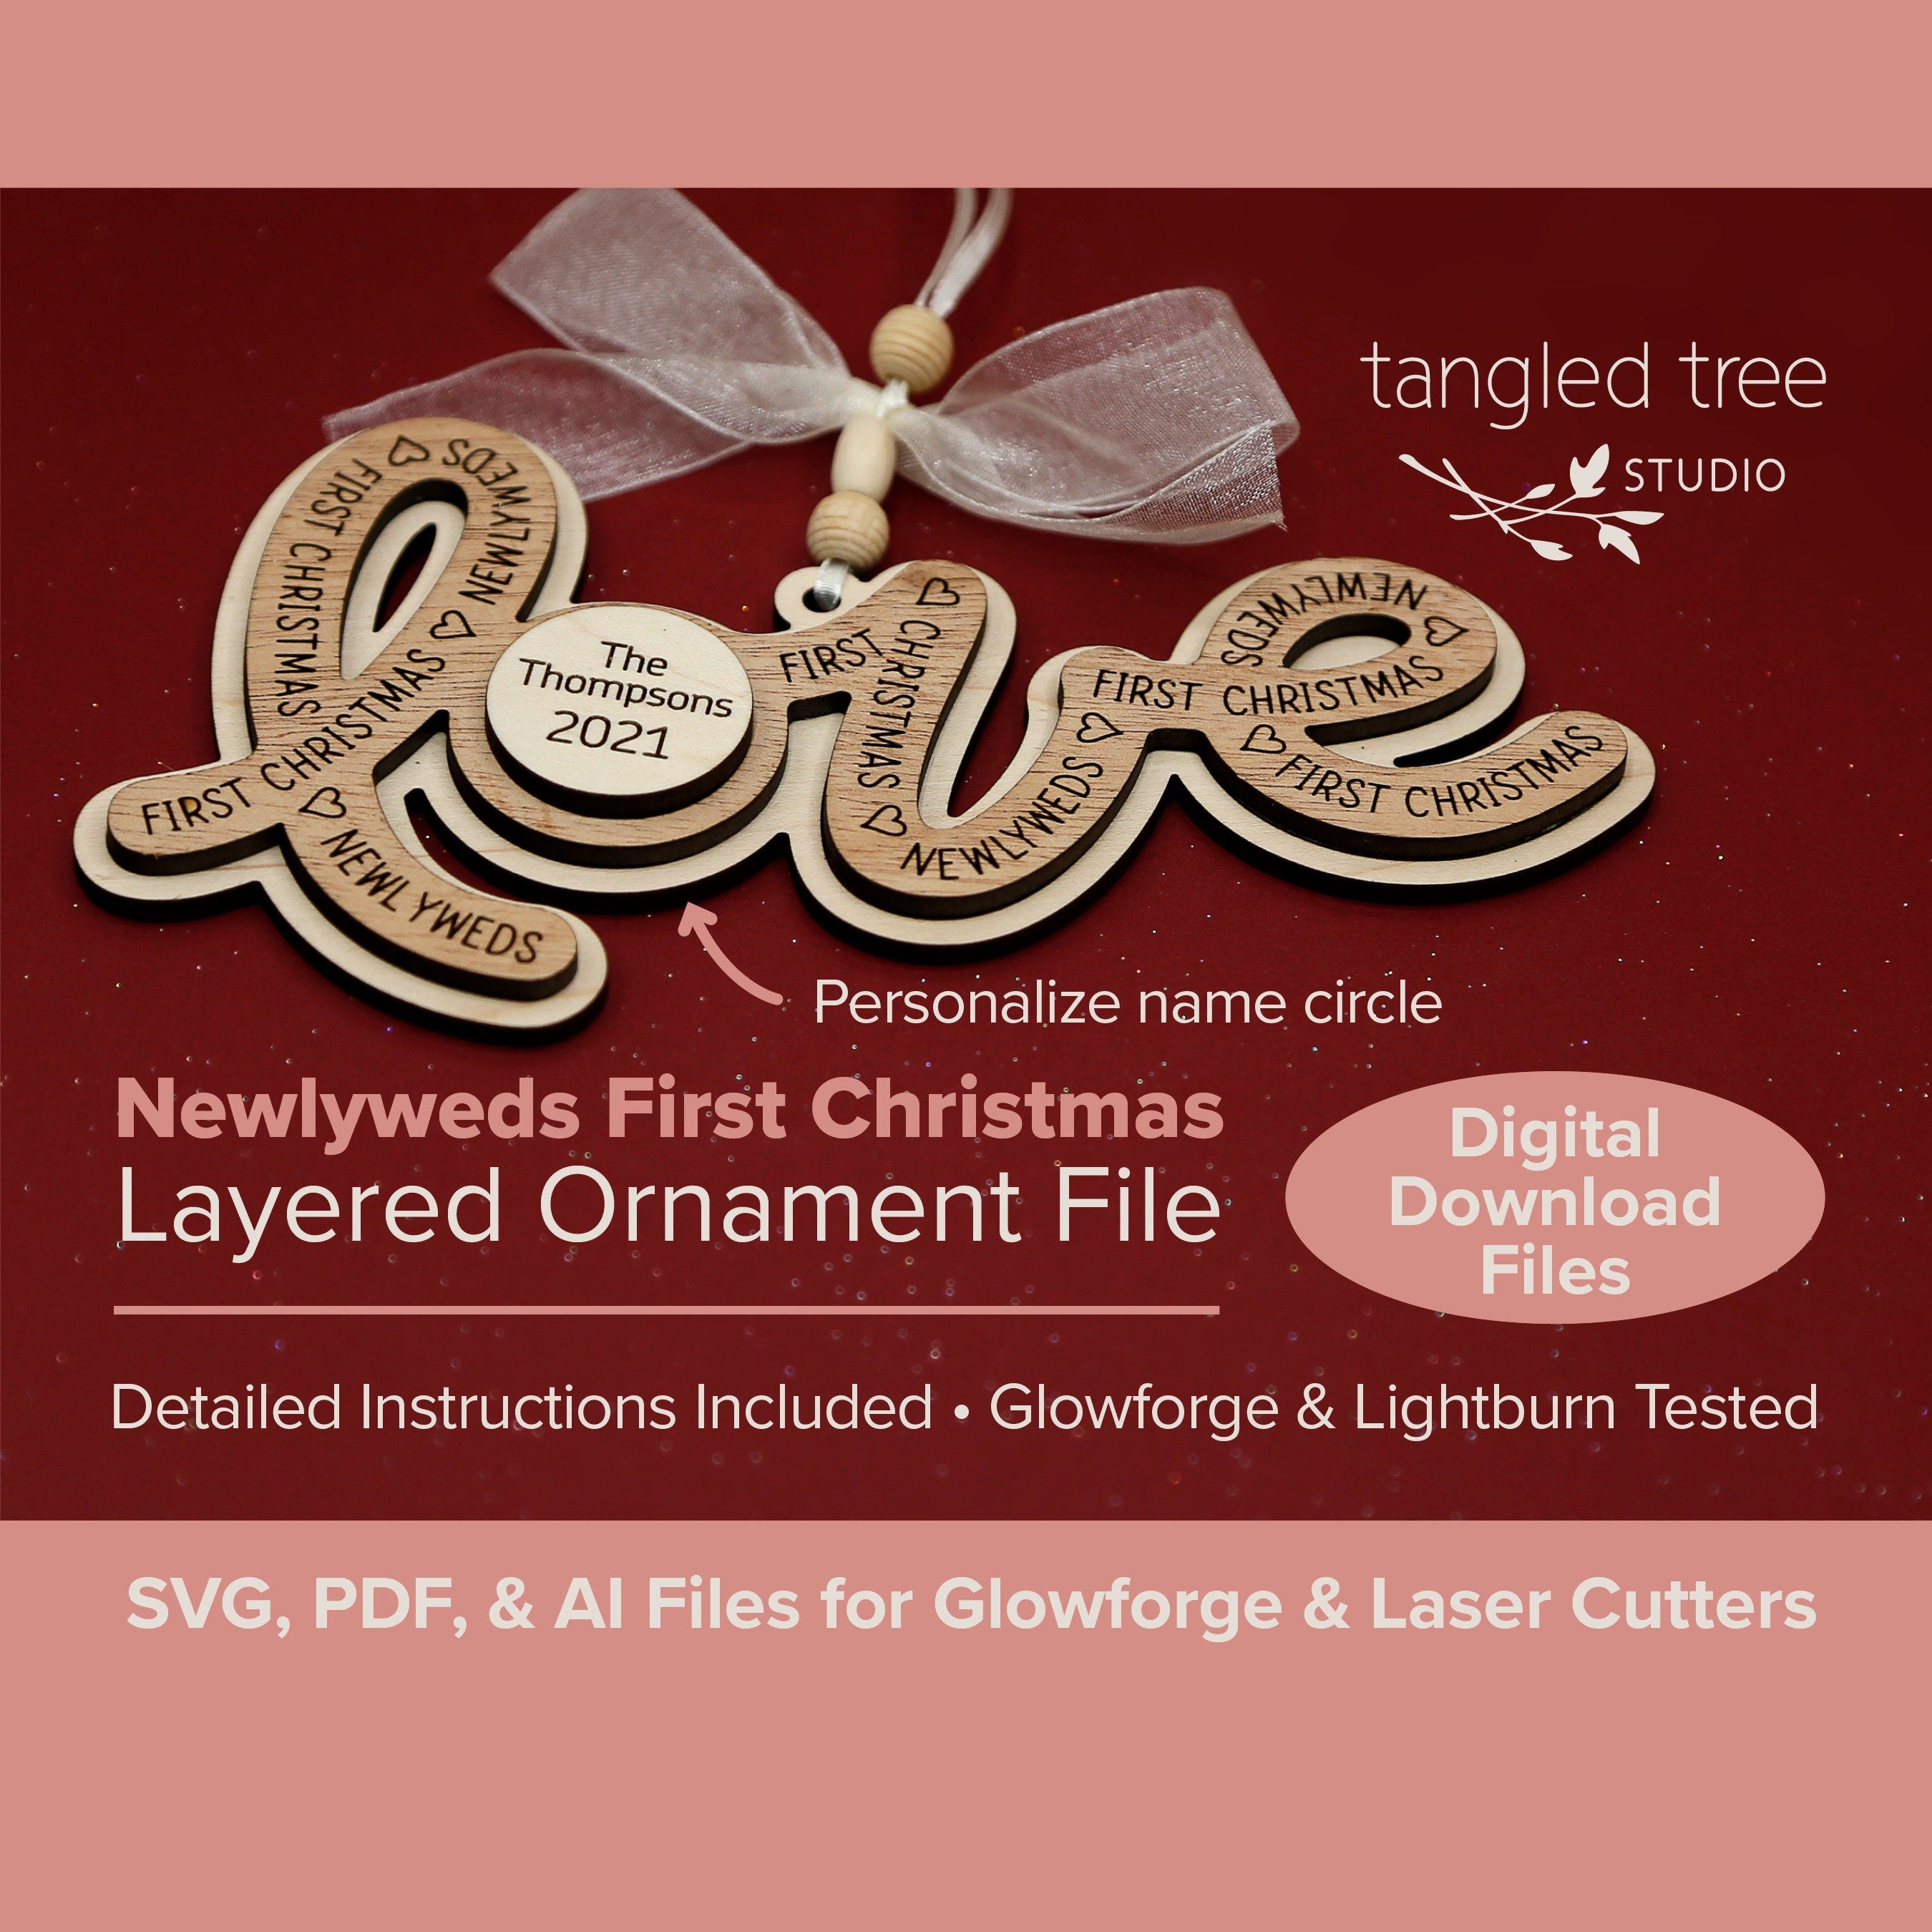 Laser SVG/PDF Files – LOVE Newlyweds First Christmas Ornament File – No physical product – Glowforge & LightBurn tested and ready